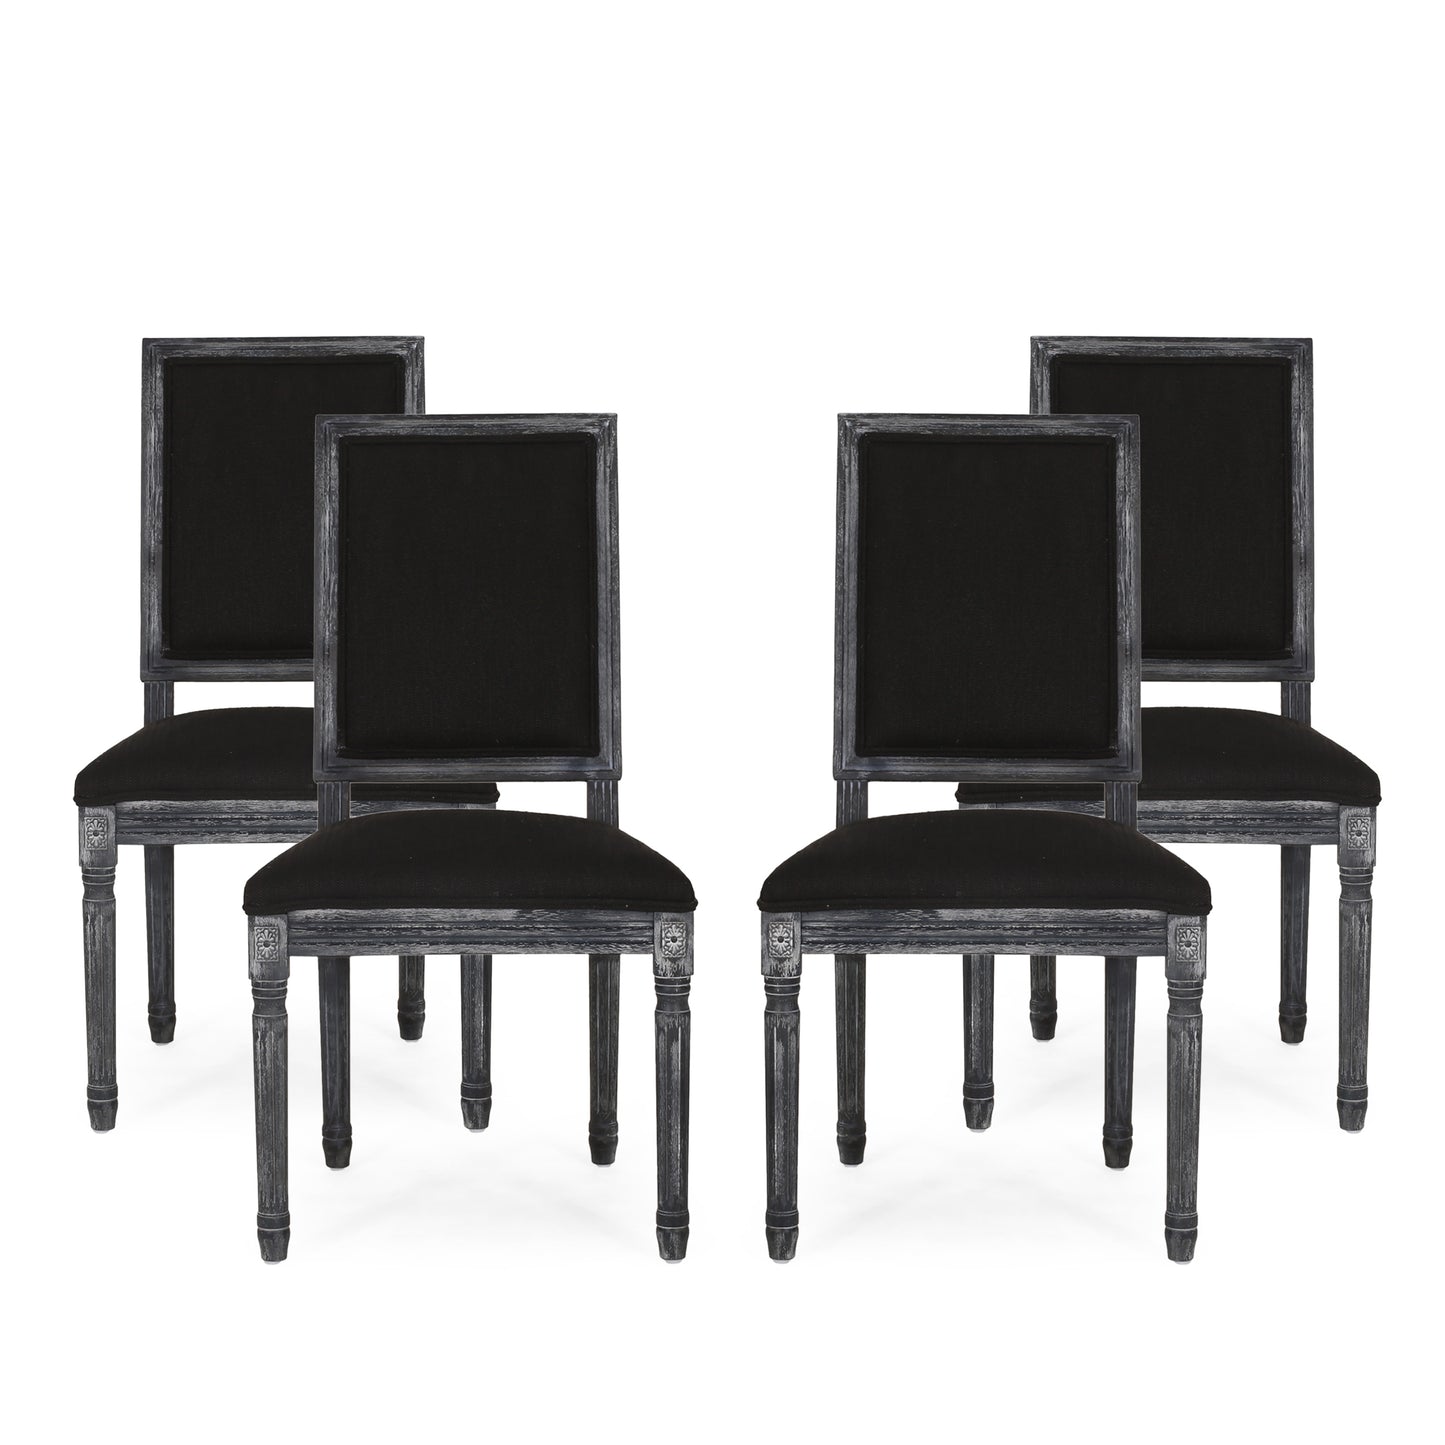 Amy French Country Wood Upholstered Dining Chair, Set of 4